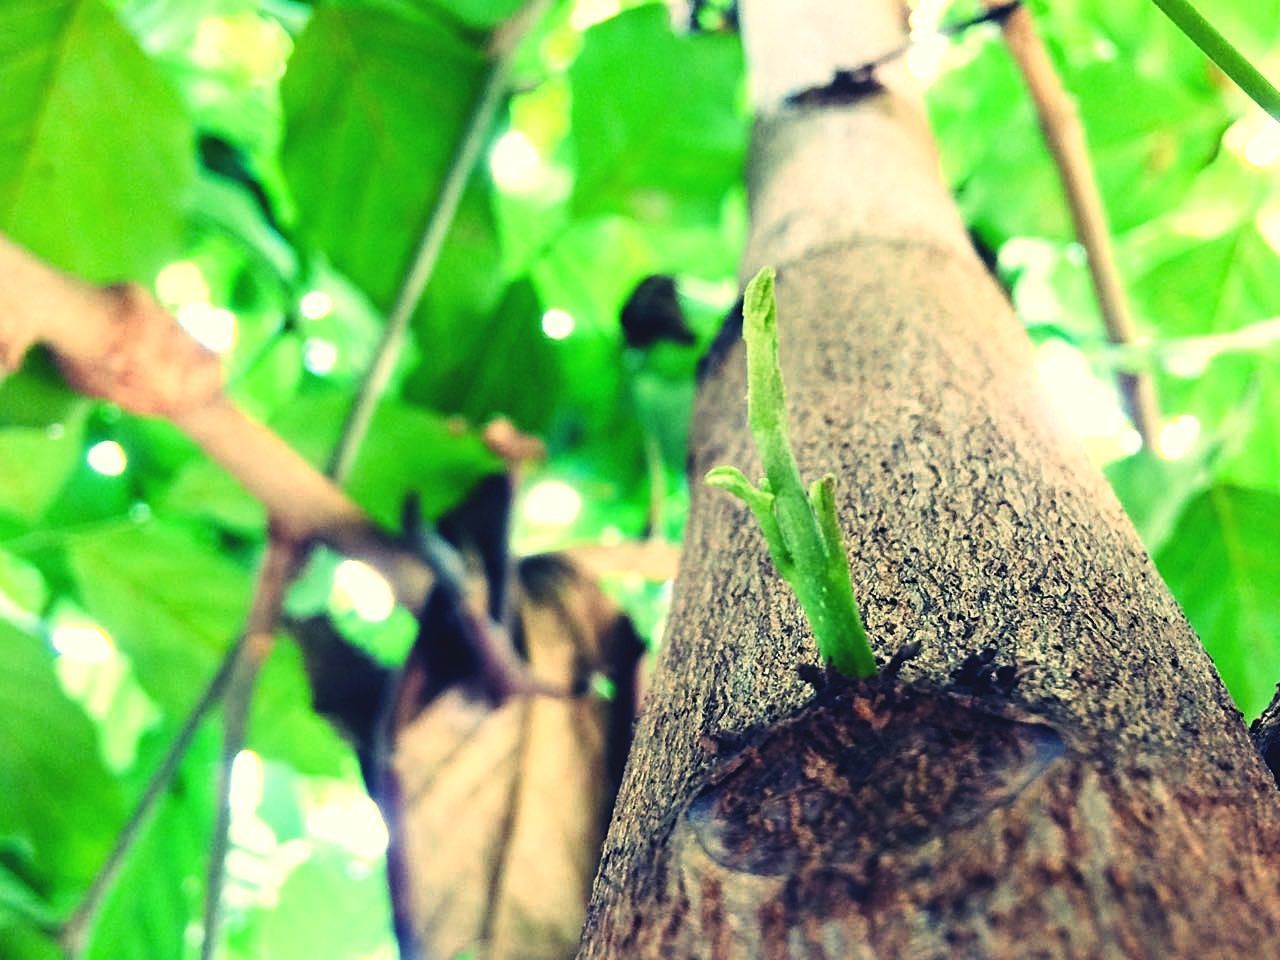 CLOSE-UP OF SNAKE ON TREE